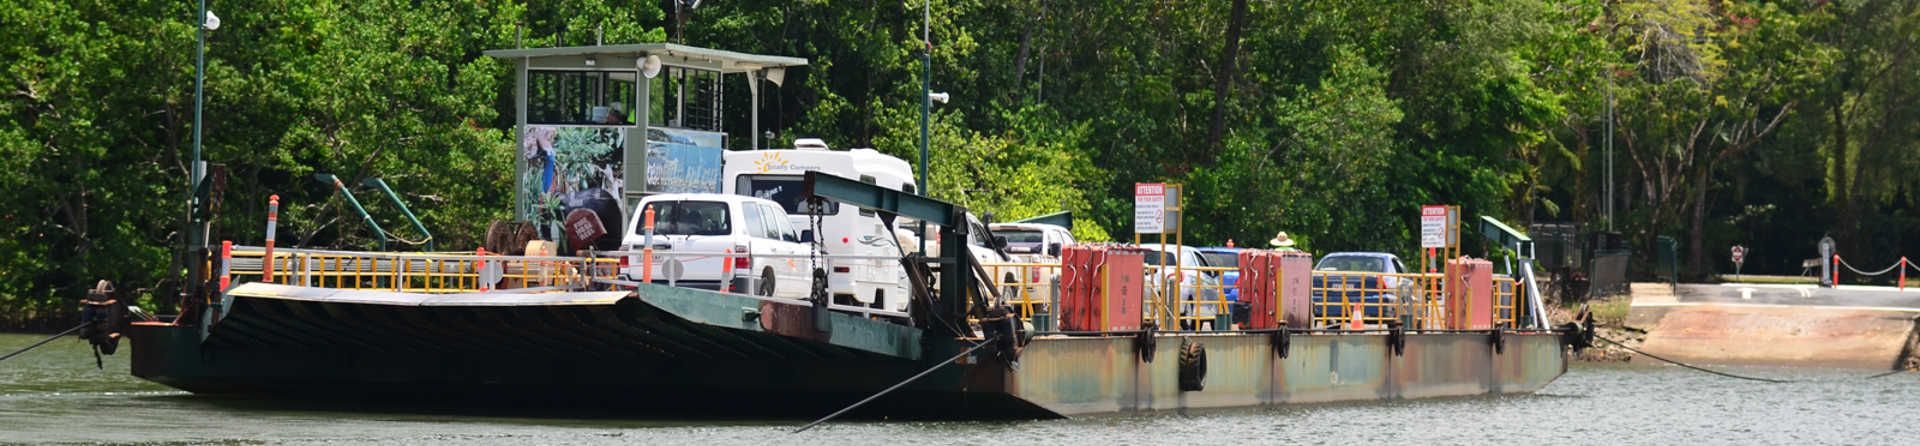 How Much Does the Daintree Ferry Cost?